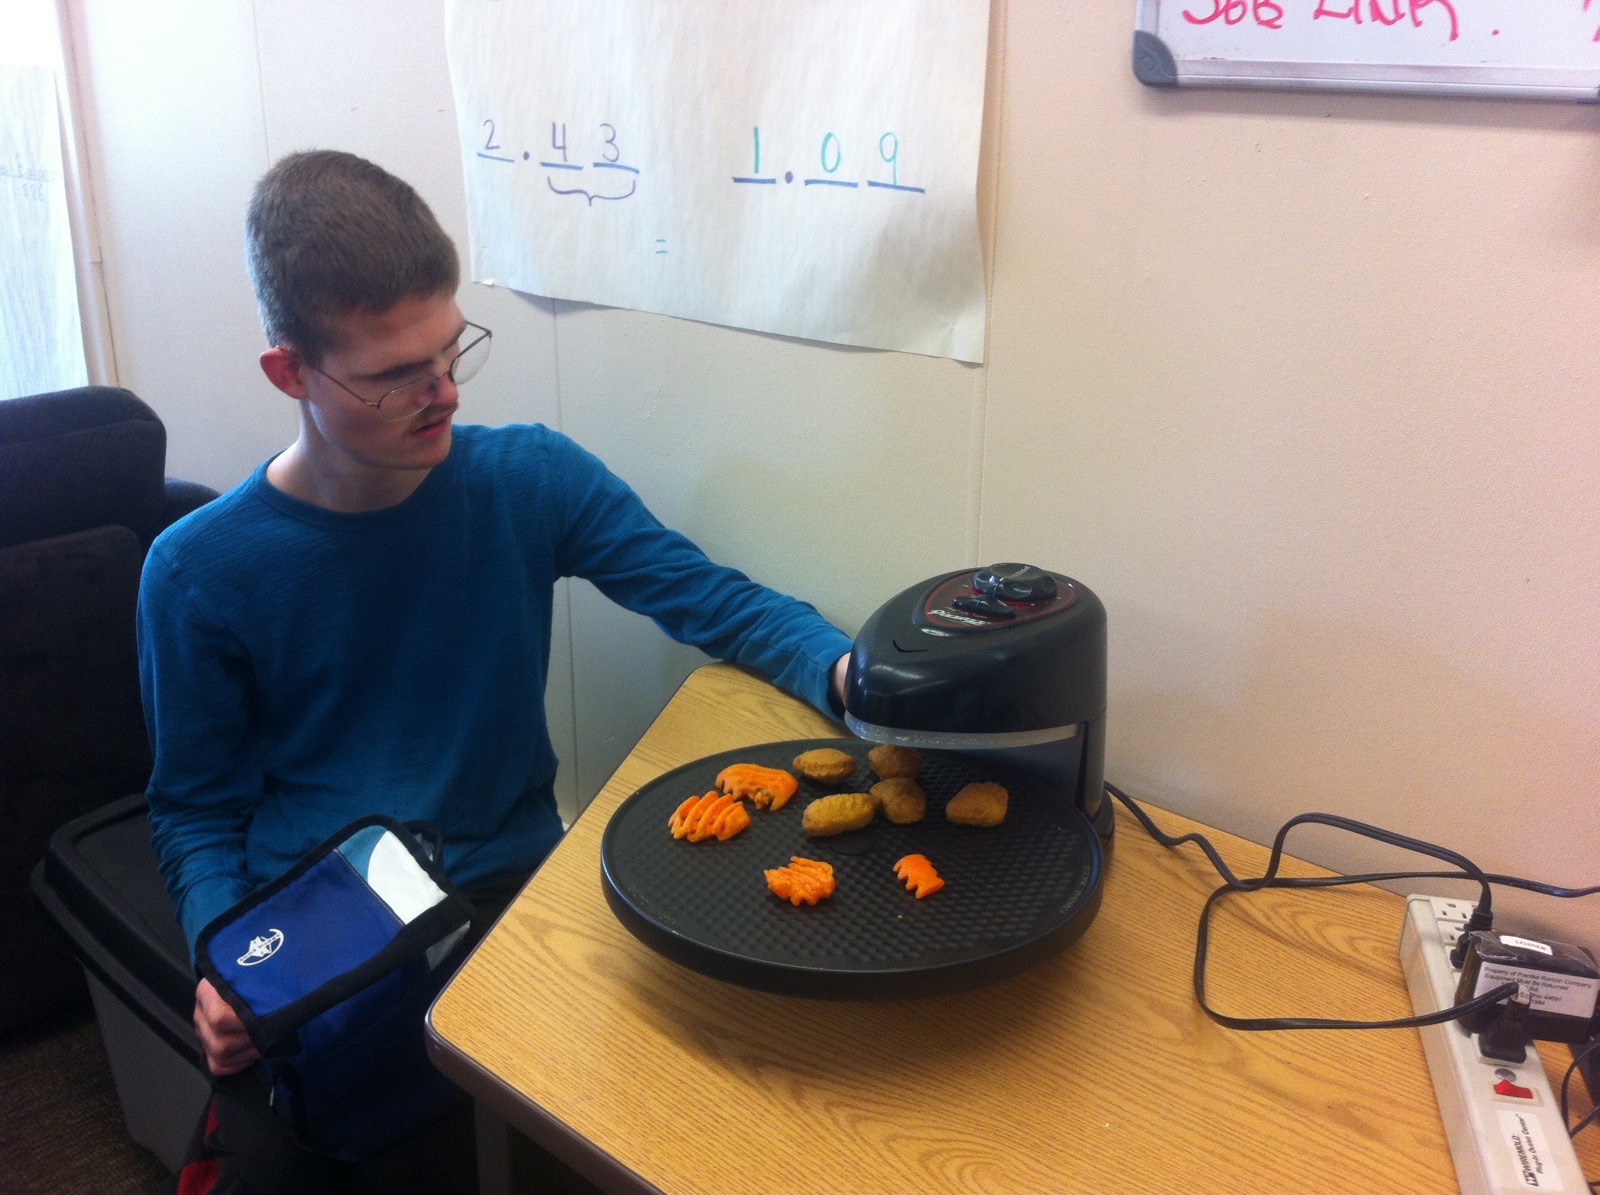 A young man who is deaf-blind is sitting at a table cooking carrots and potatoes on an electronic cooking device.